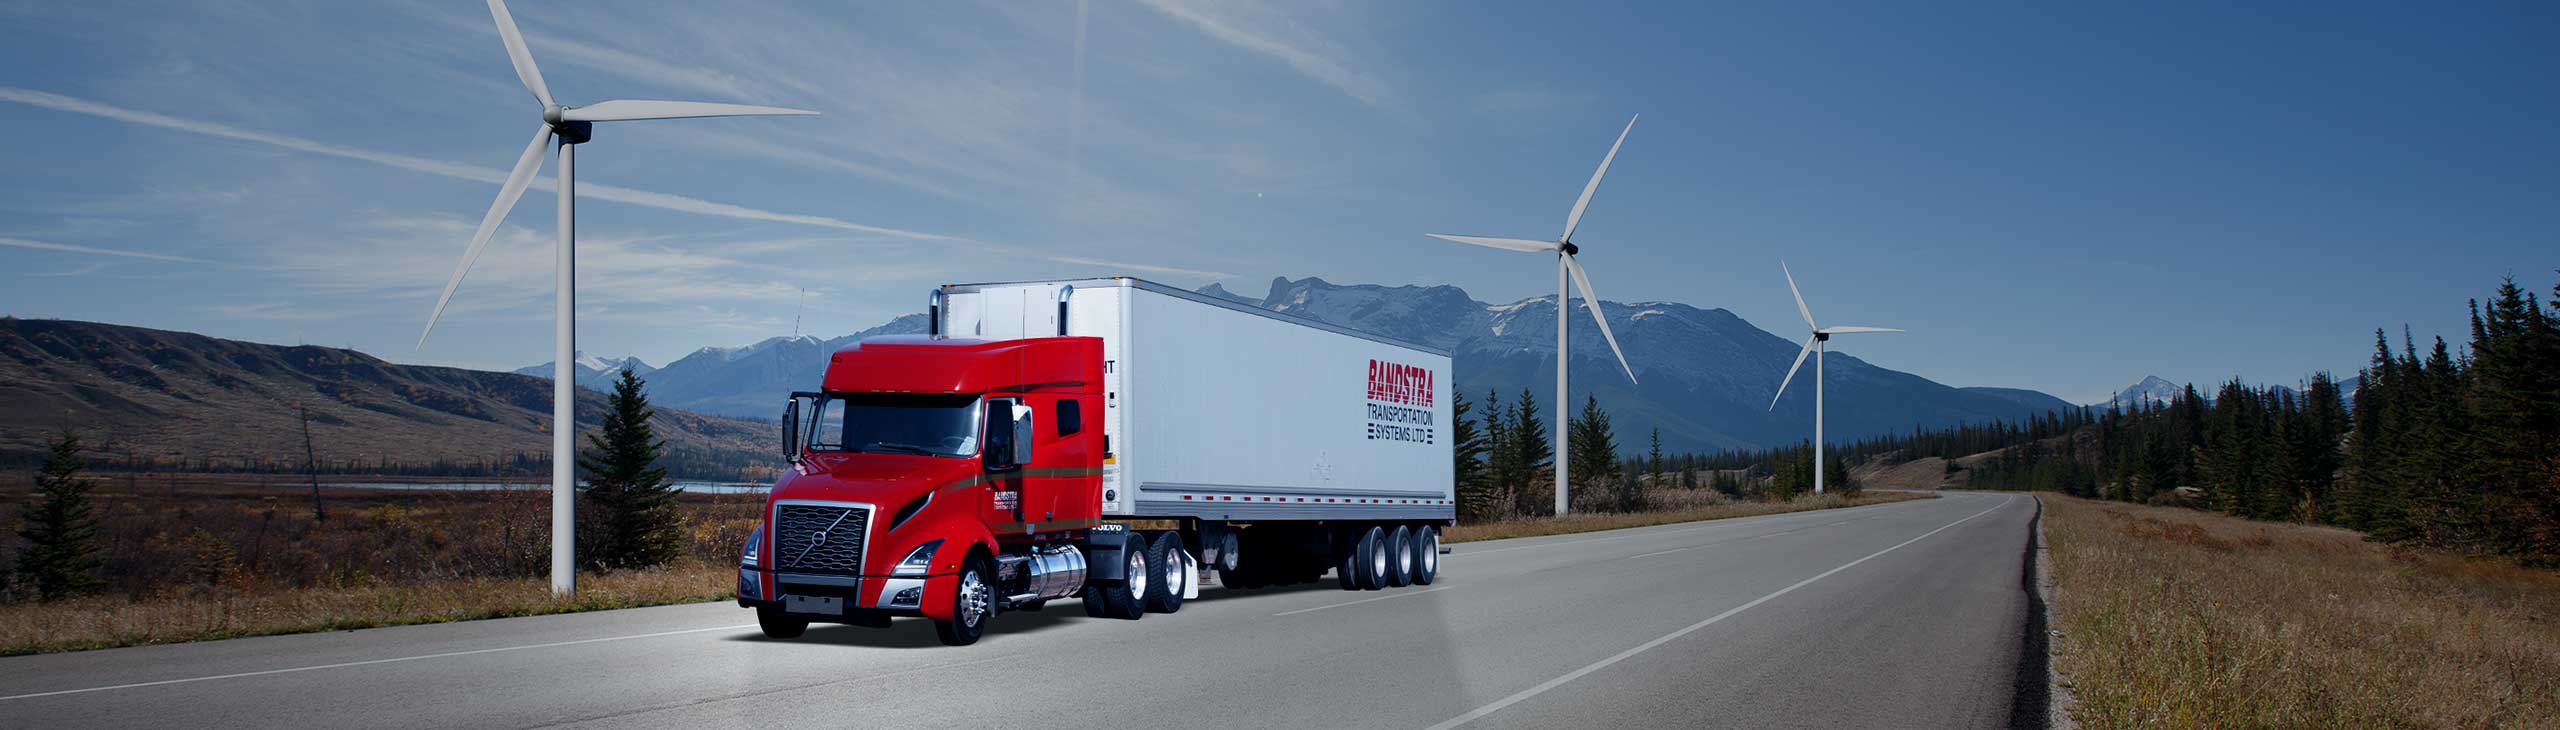 Bandstra highway truck driving by windmills and BC landscape